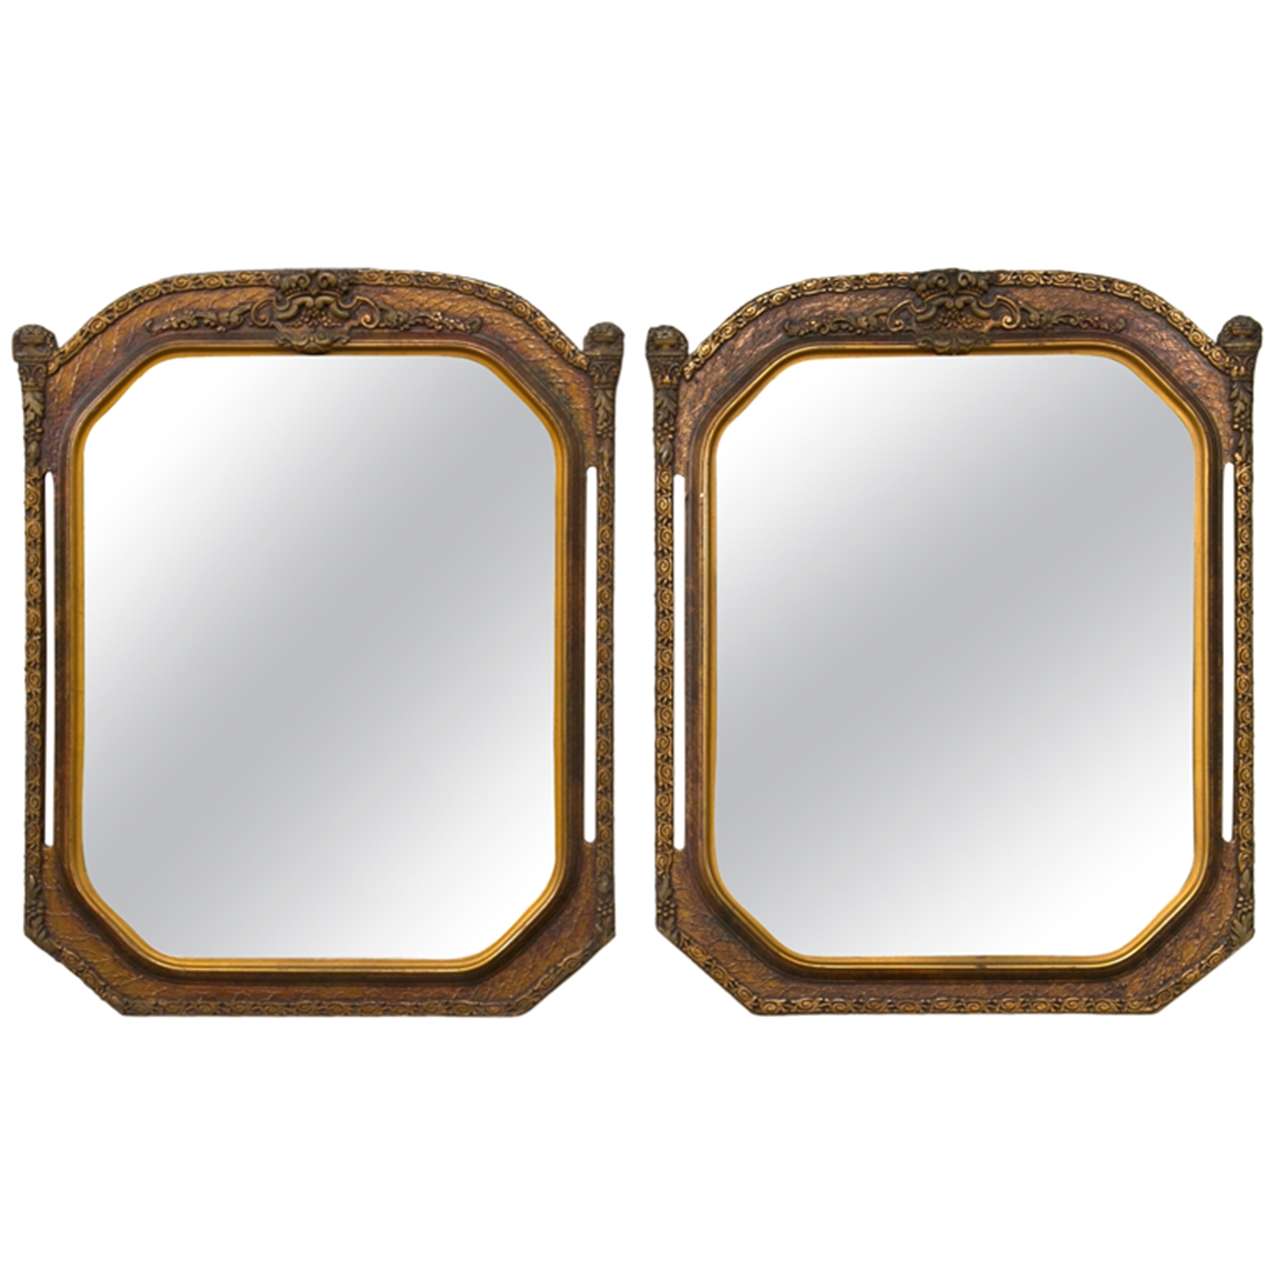 Fine Pair of Gilt Wooden Wall Mirrors Finely Carved Gold Frame With Open Sides